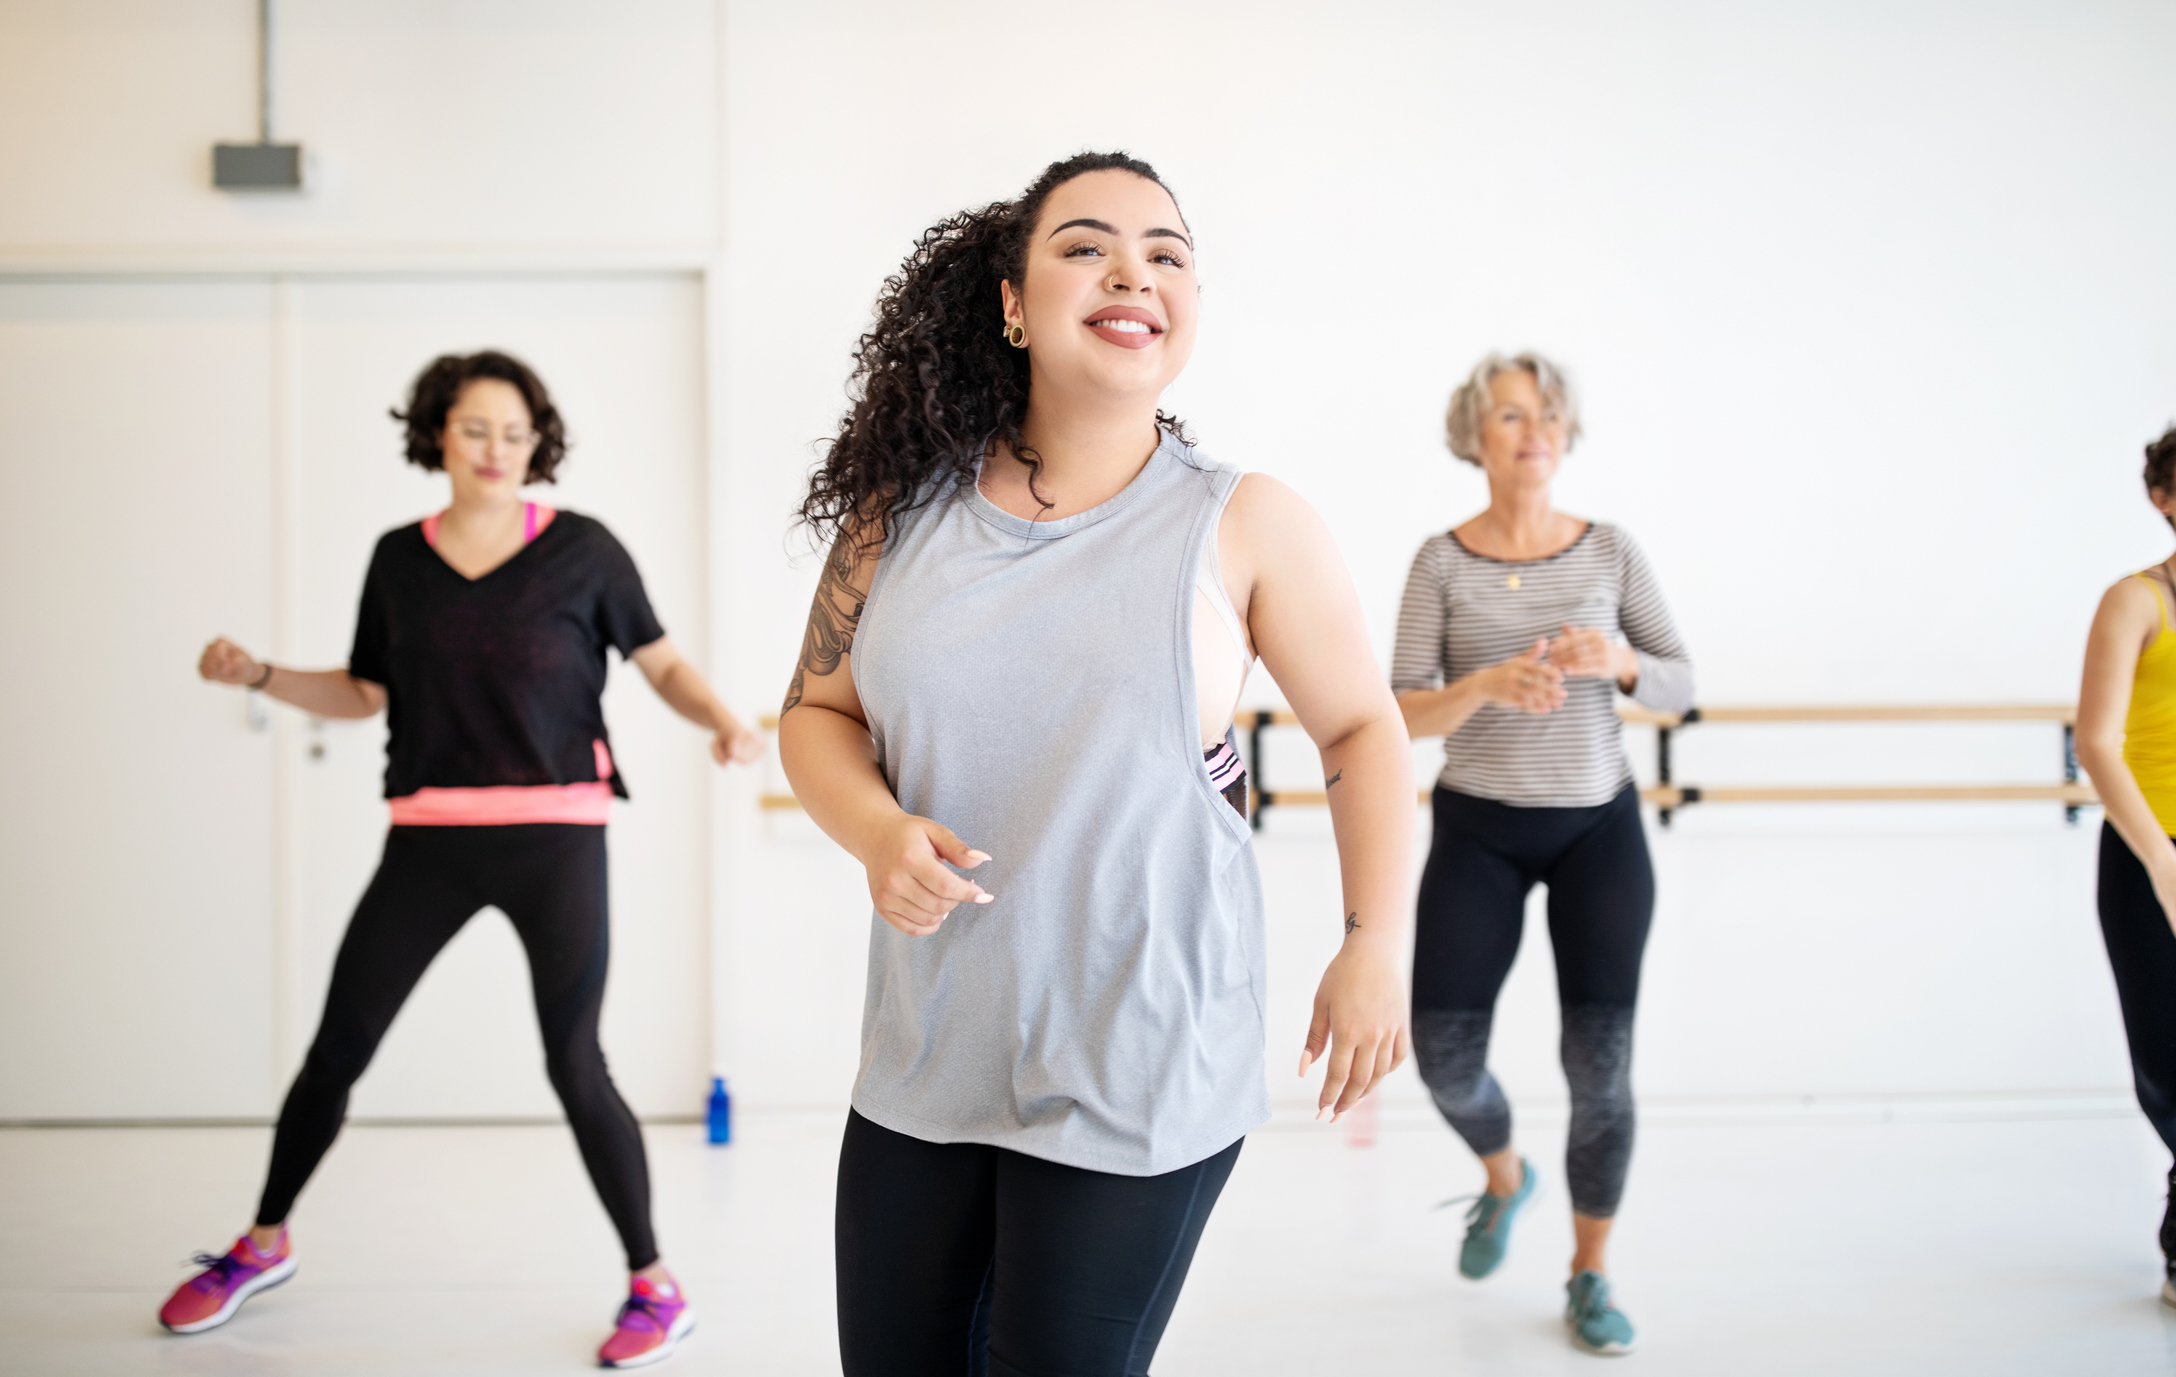 A group of women participating in a dance fitness class, led by an instructor in the foreground